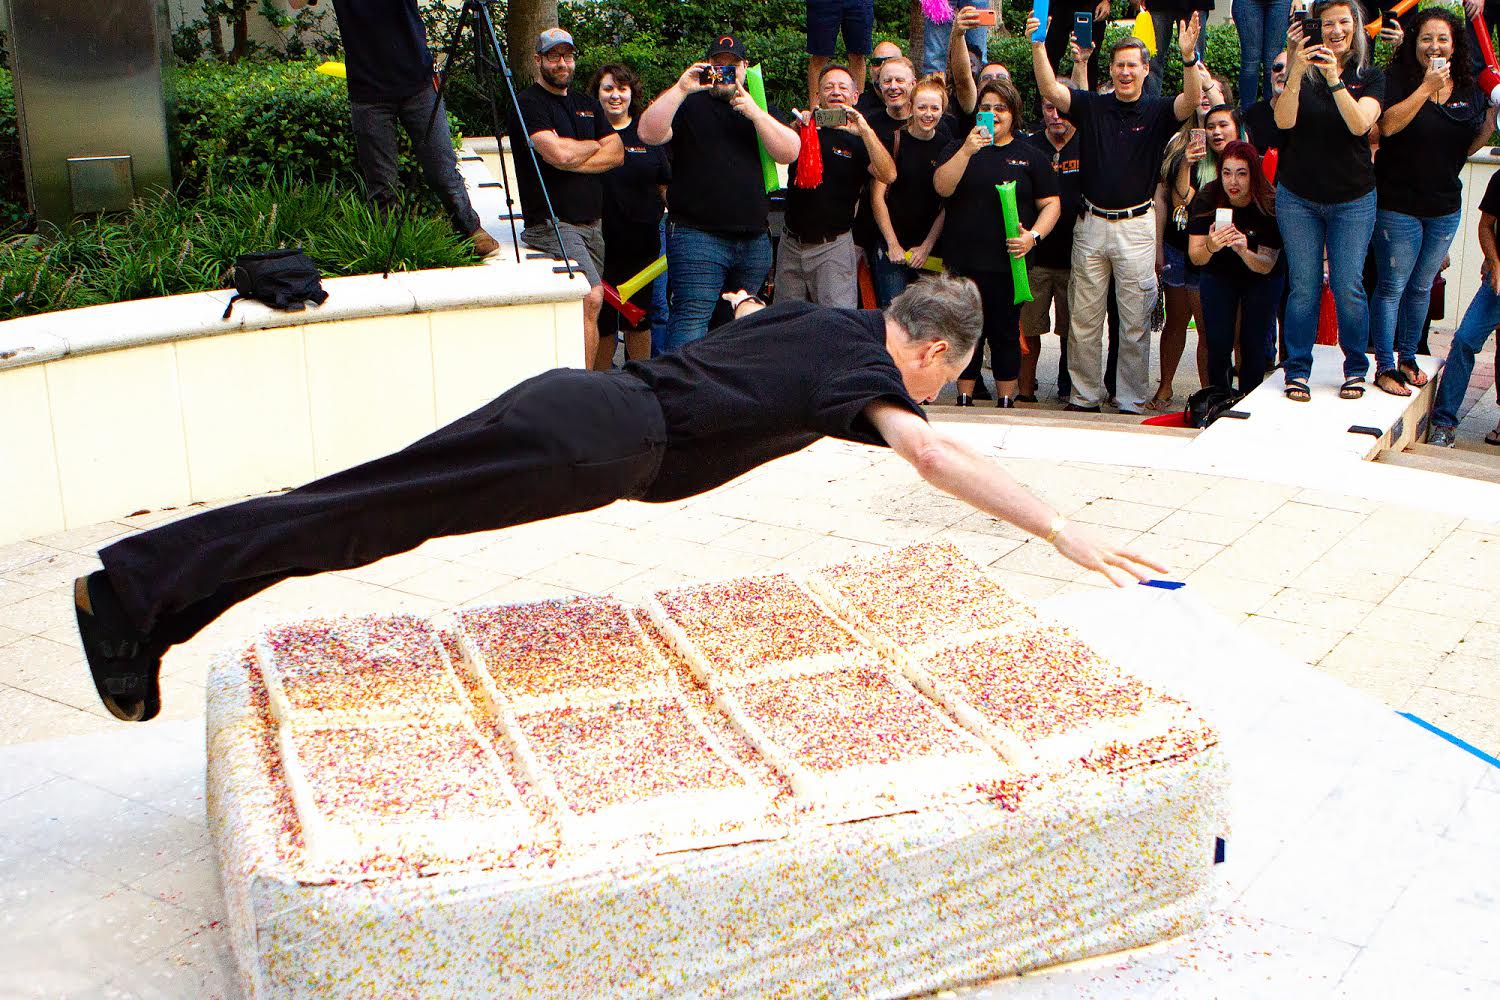 Stu dives into a giant cake for KnowBe4's 8th birthday